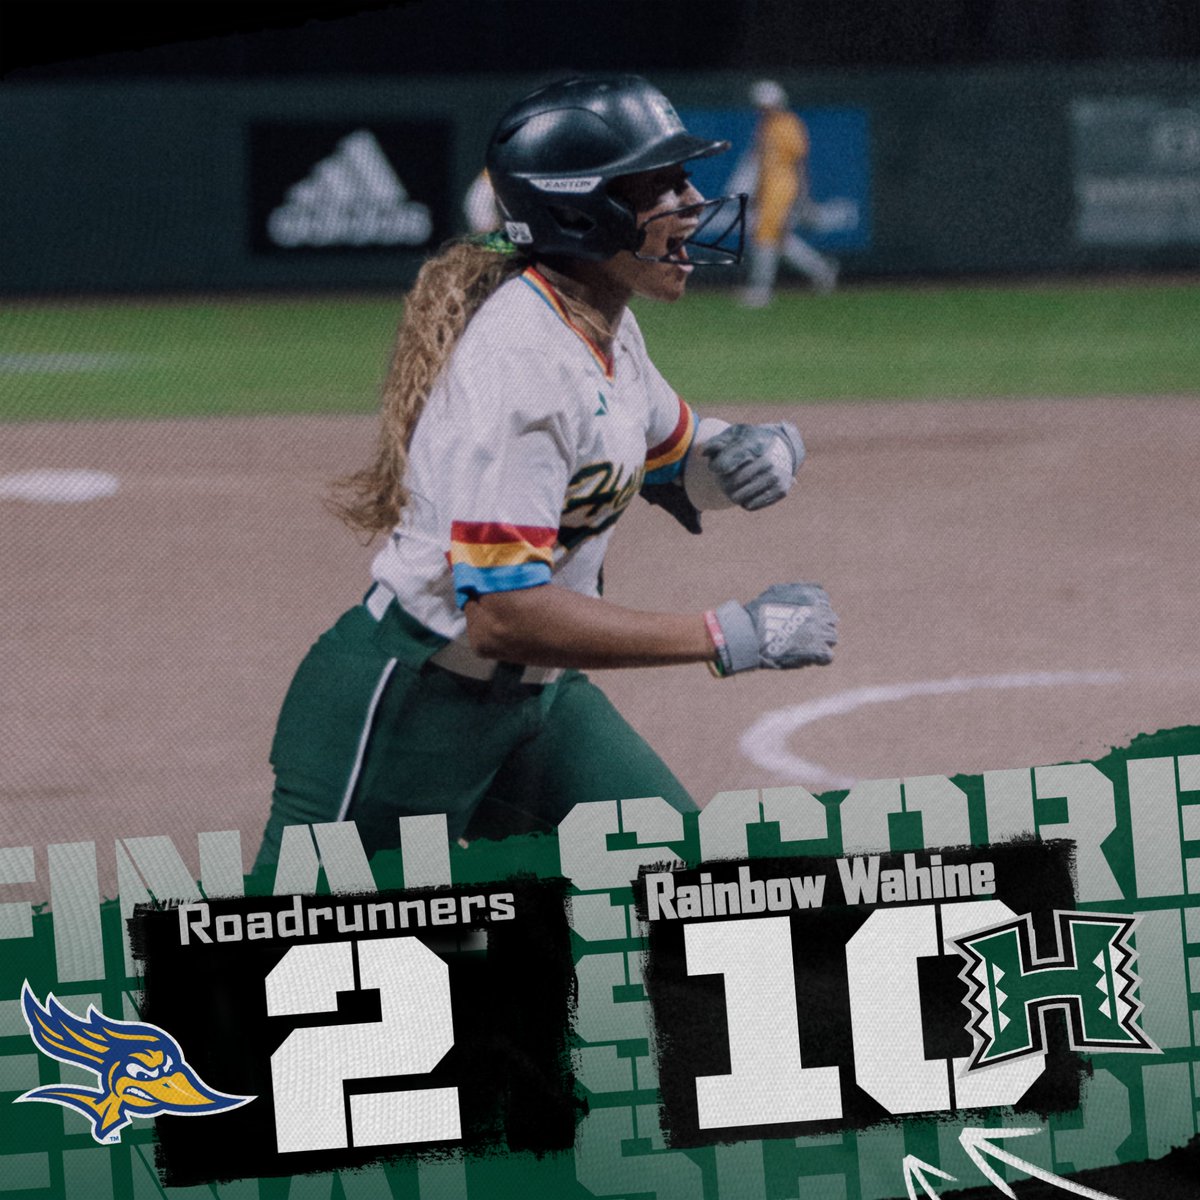 #HawaiiSB WINS! UH downs Cal State Bakersfield, 10-2 in five! The 'Bows offensive attack was highlighted by a grand slam by Bethea in B4th! #GoBows